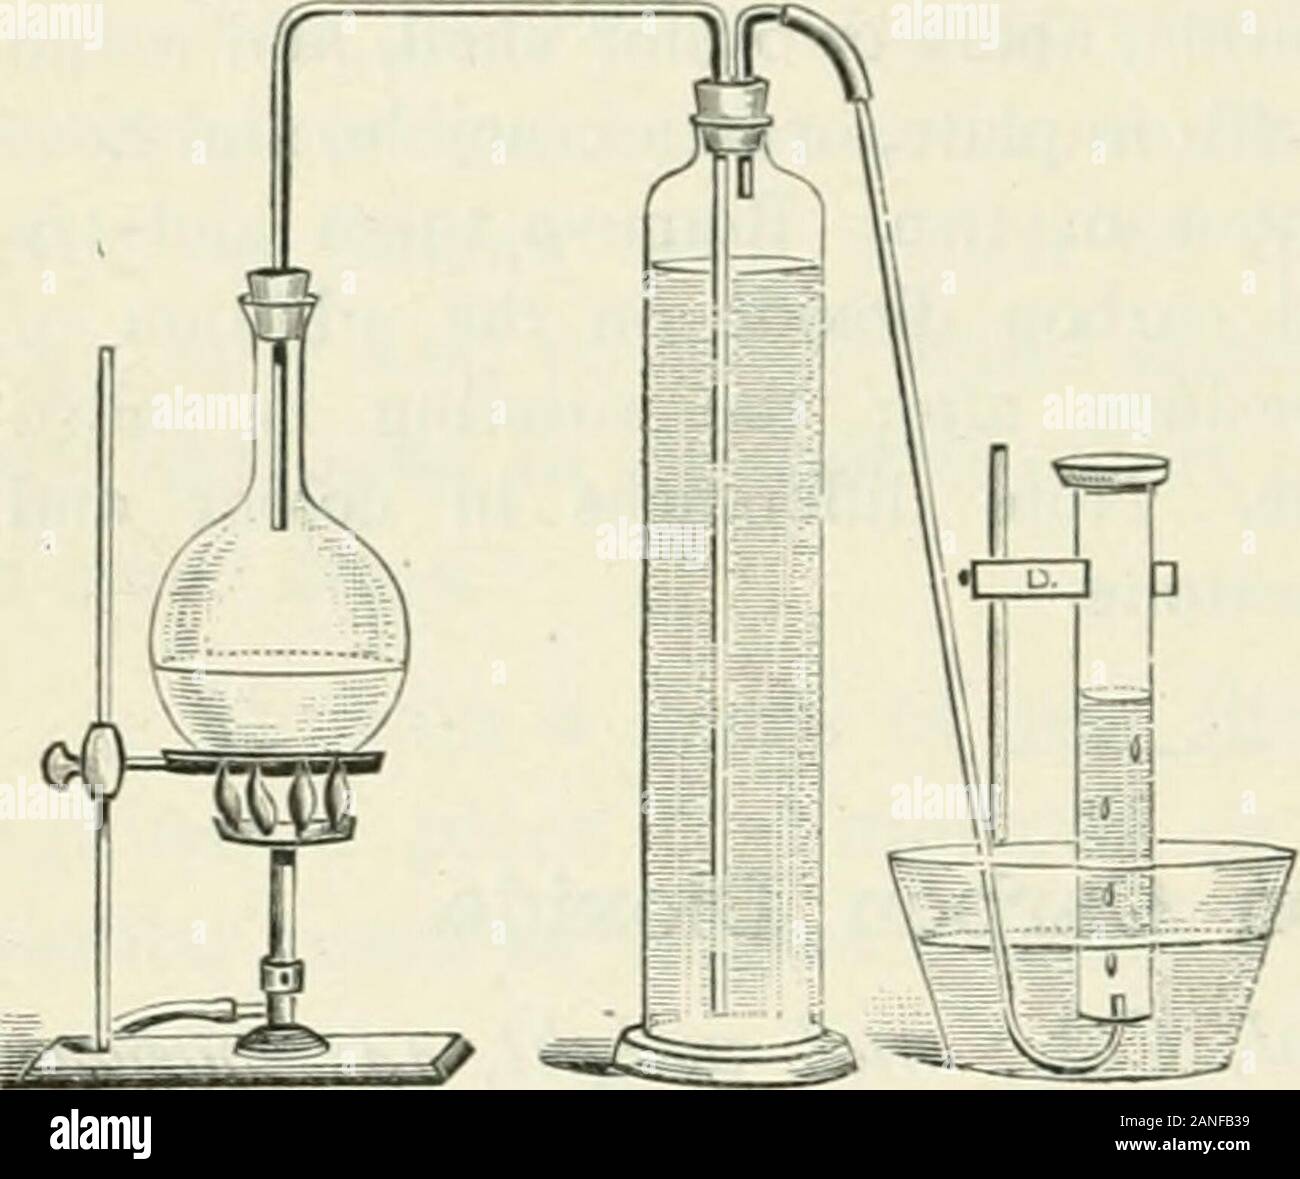 High School Chemistry . y to the flask,regulating it so thatthe gas may comeoff in a slow, steadystream. After theair has been expelled from the apparatus, collect threebottles of the gas, and allow these bottles to stand overwater for some time before using them. Meanwhile, sub-stitute for the delivery tube one whose end has beendrawn to a fine point. Apply a lighted match to the jet.* 2. Raise one of the bottles of gas from the water,and apply a lighted taper to its mouth. 3. Try to pour the gas from one bottle to another,then test the result with a lighted taper. * Unless the experimenter i Stock Photo